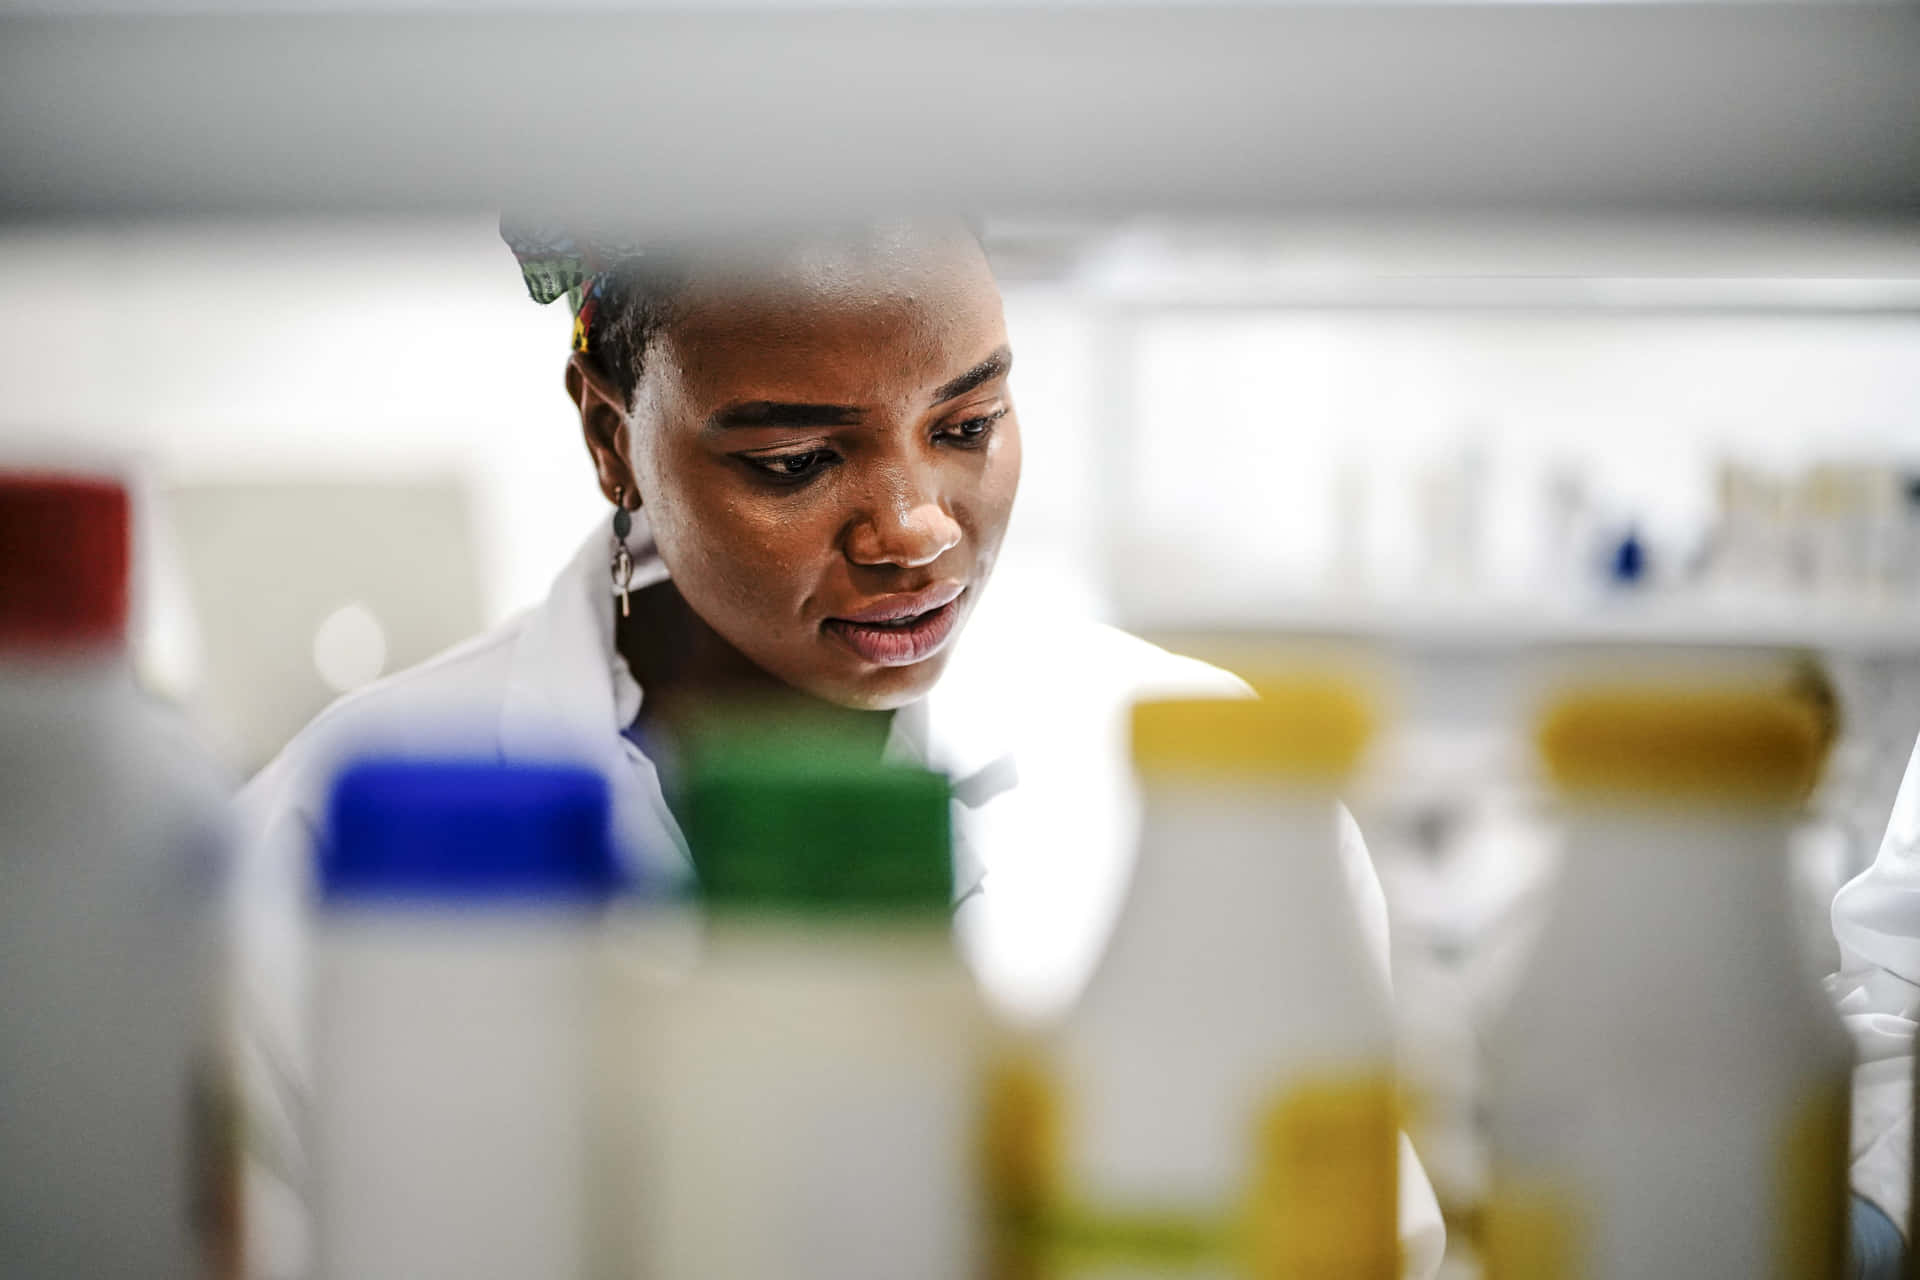 A Woman In A Lab Looking At Bottles